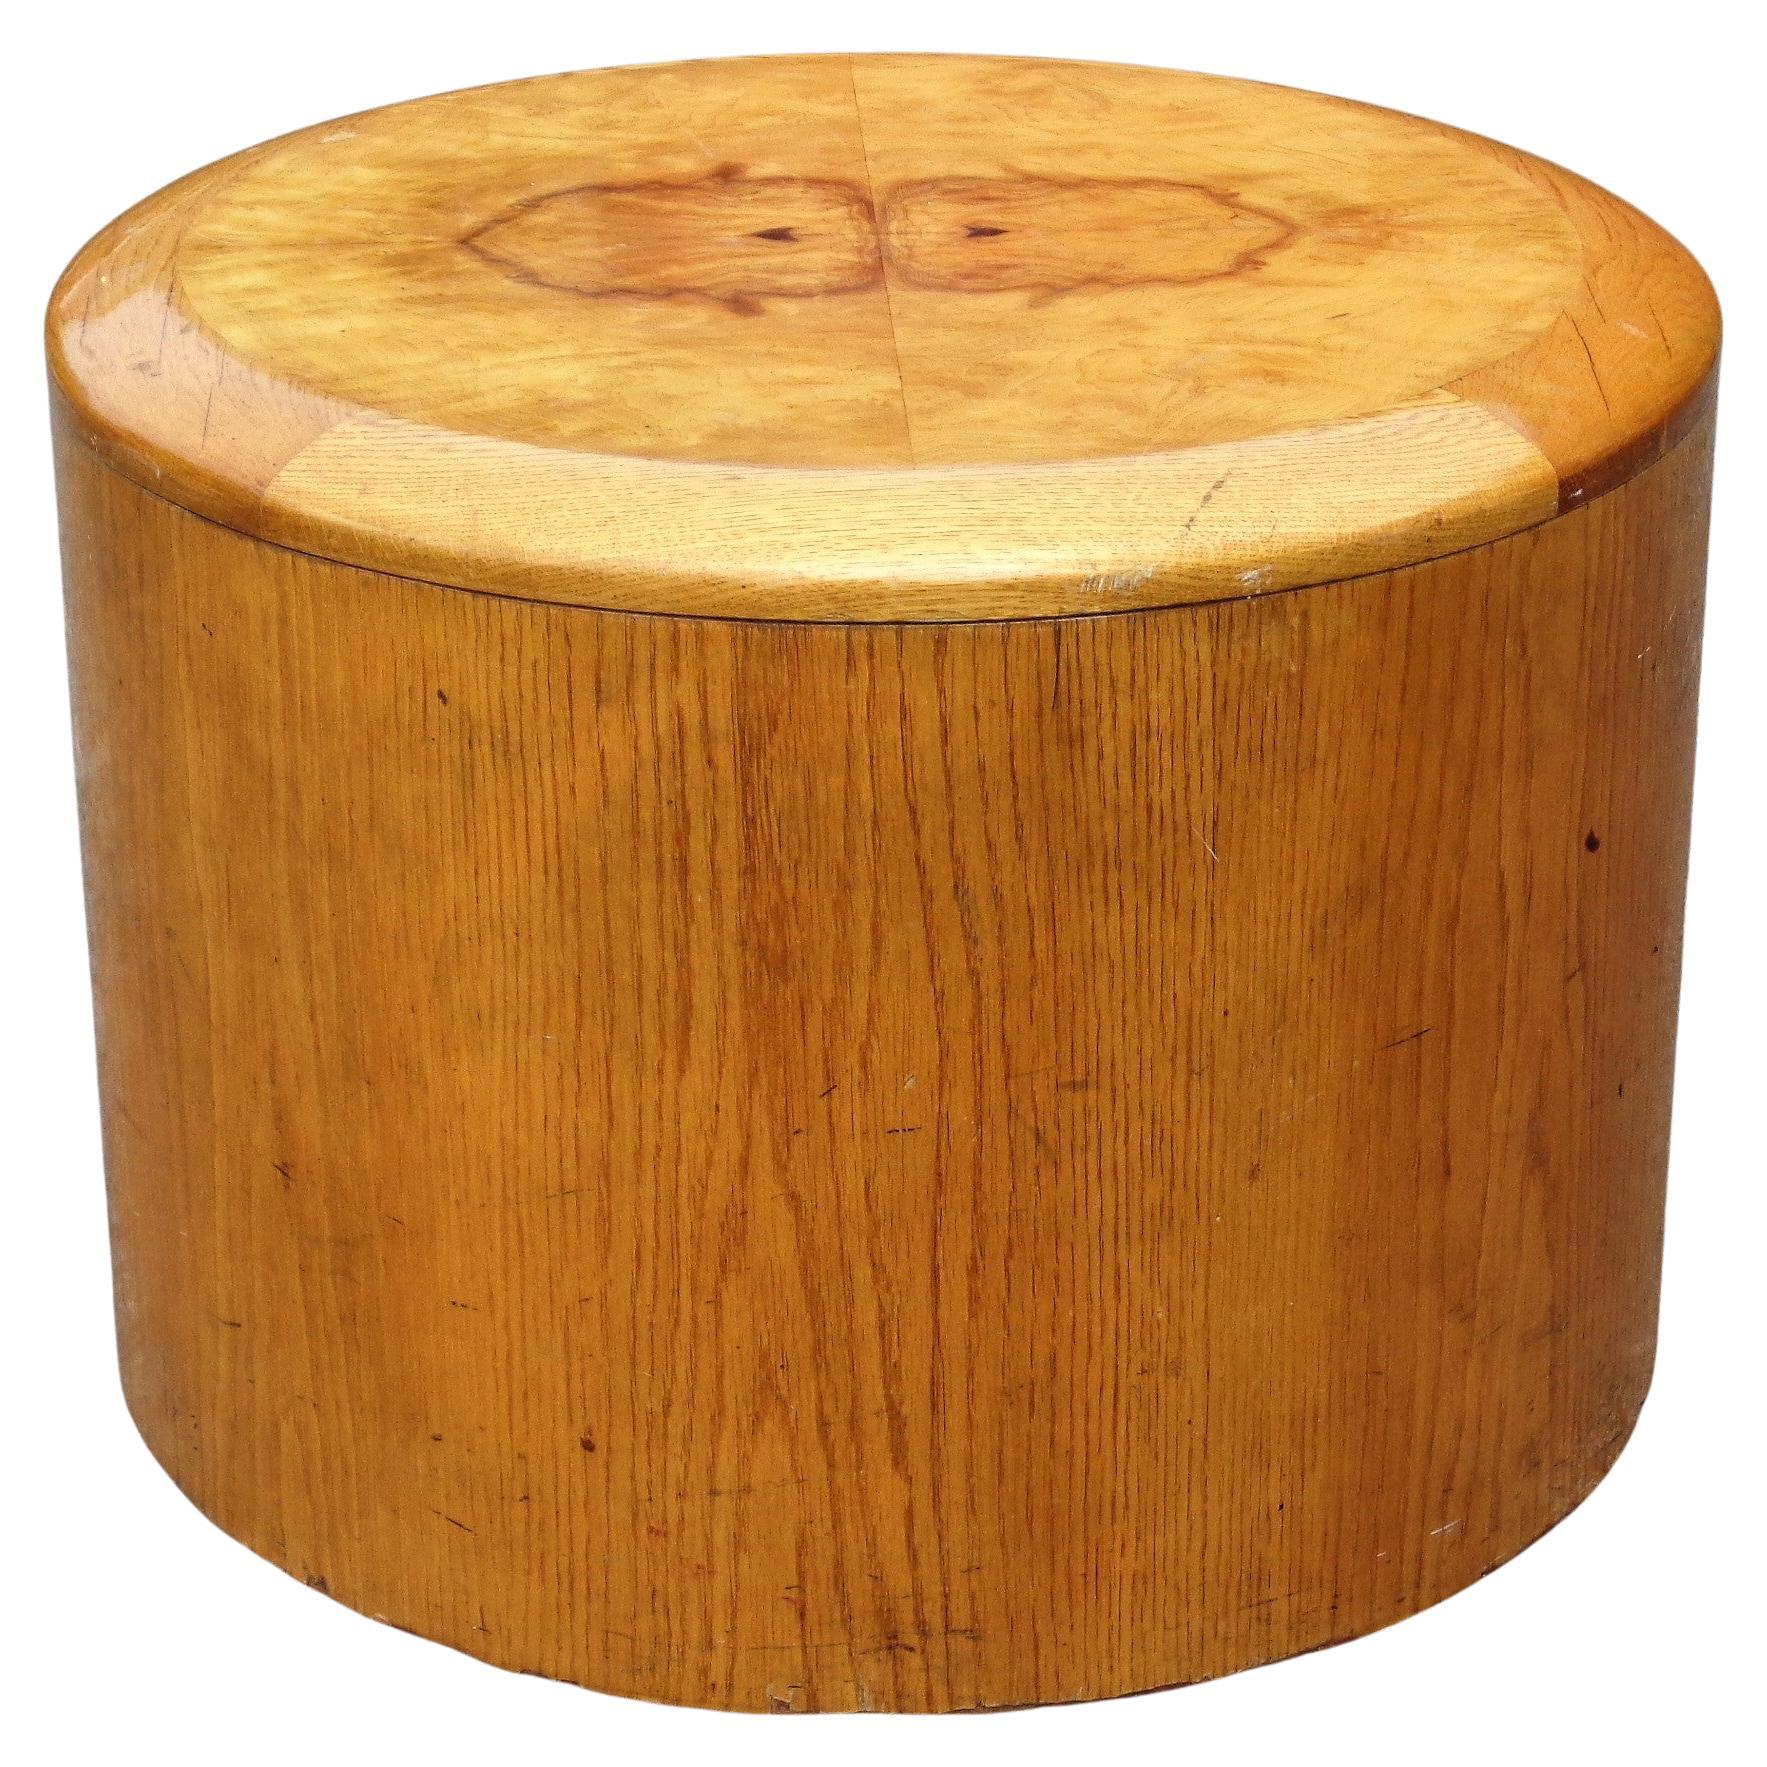  Cylindrical Olive Wood Burl Top Table, Circa 1970's For Sale